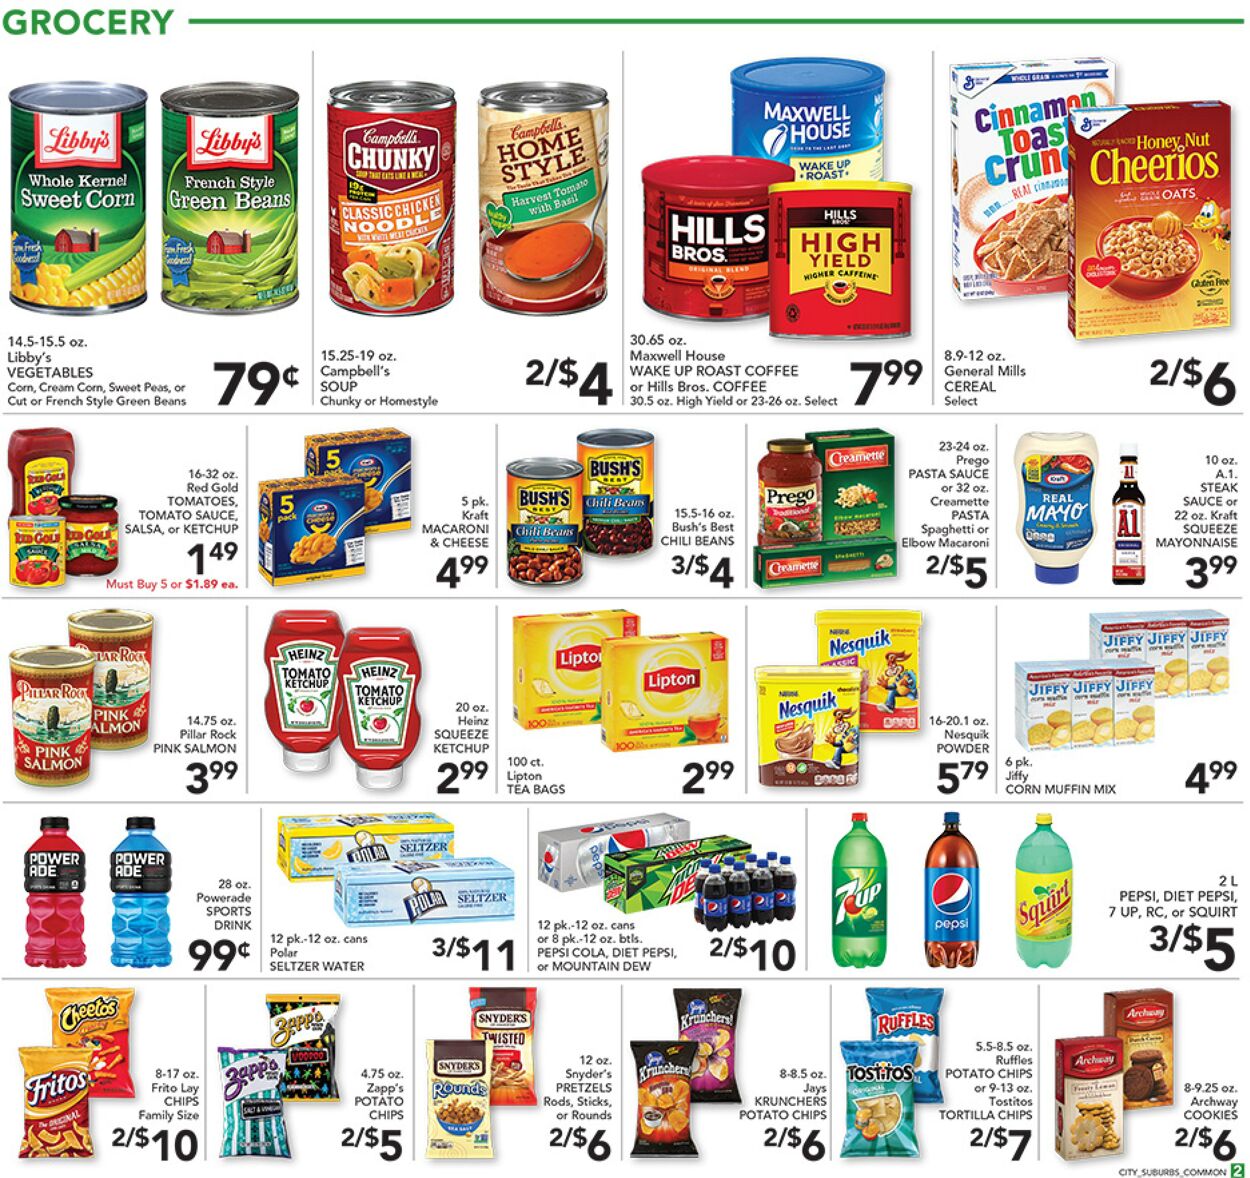 Weekly ad Pete's Fresh Market 10/05/2022 - 10/11/2022